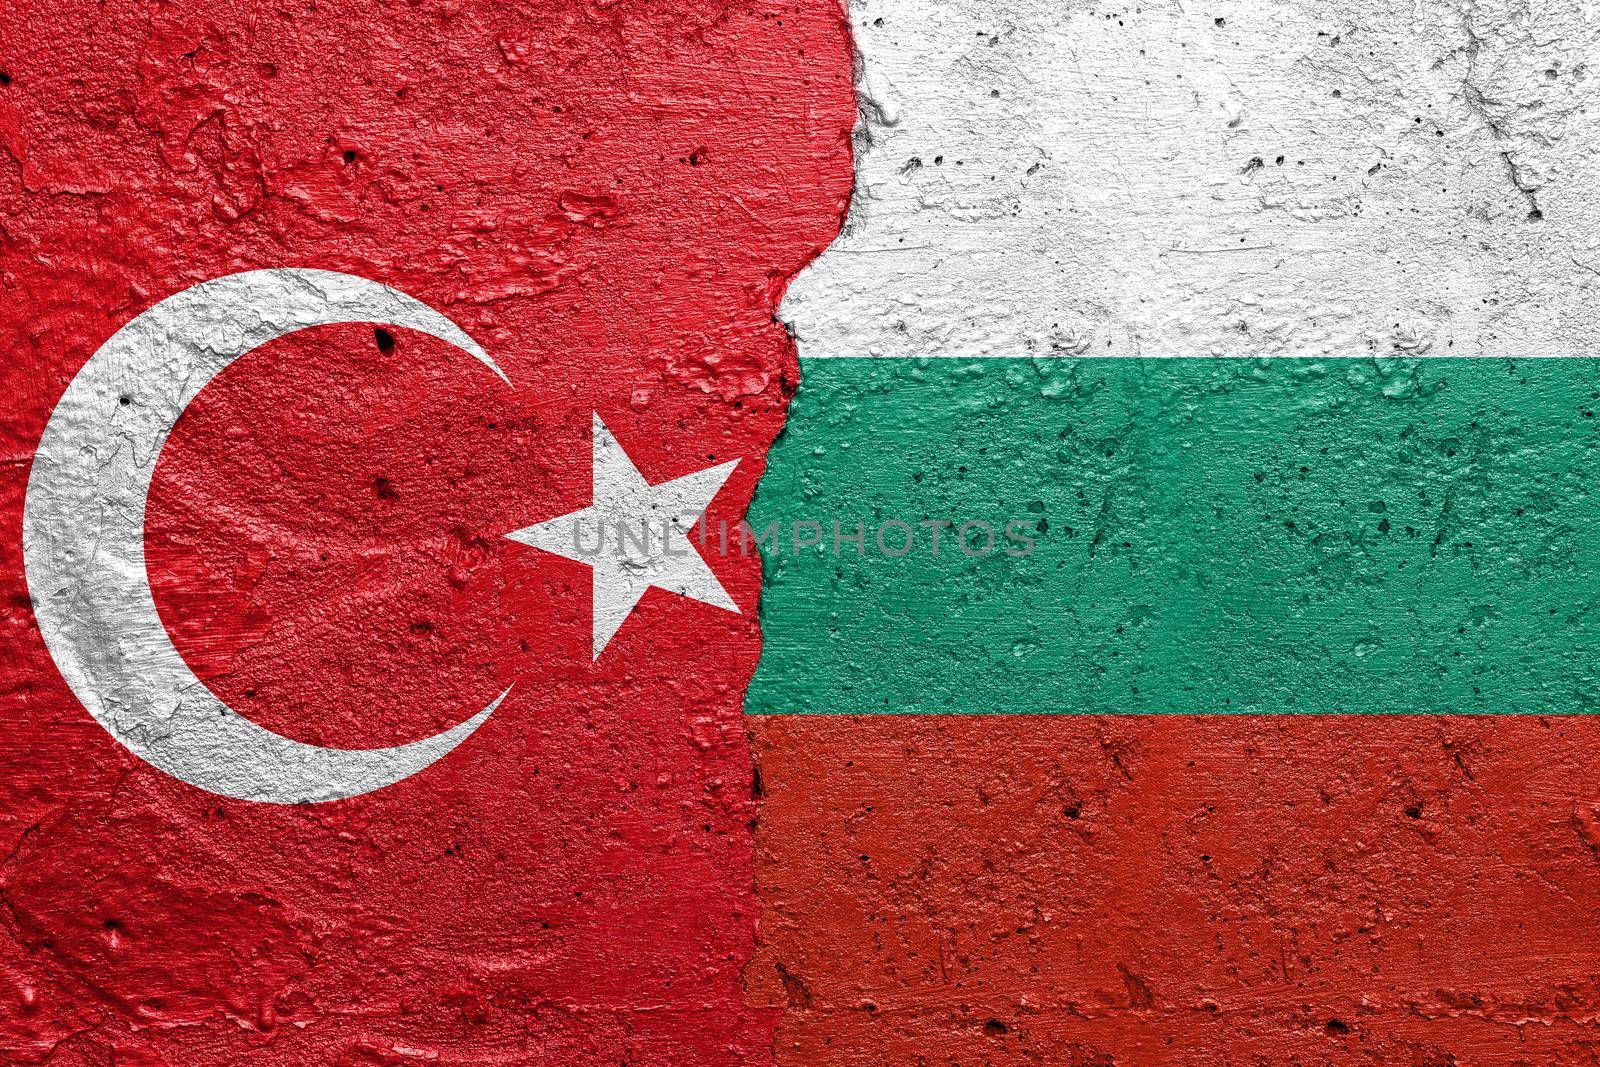 Turkey and Bulgaria - Cracked concrete wall painted with a Turkish flag on the left and a Bulgarian flag on the right